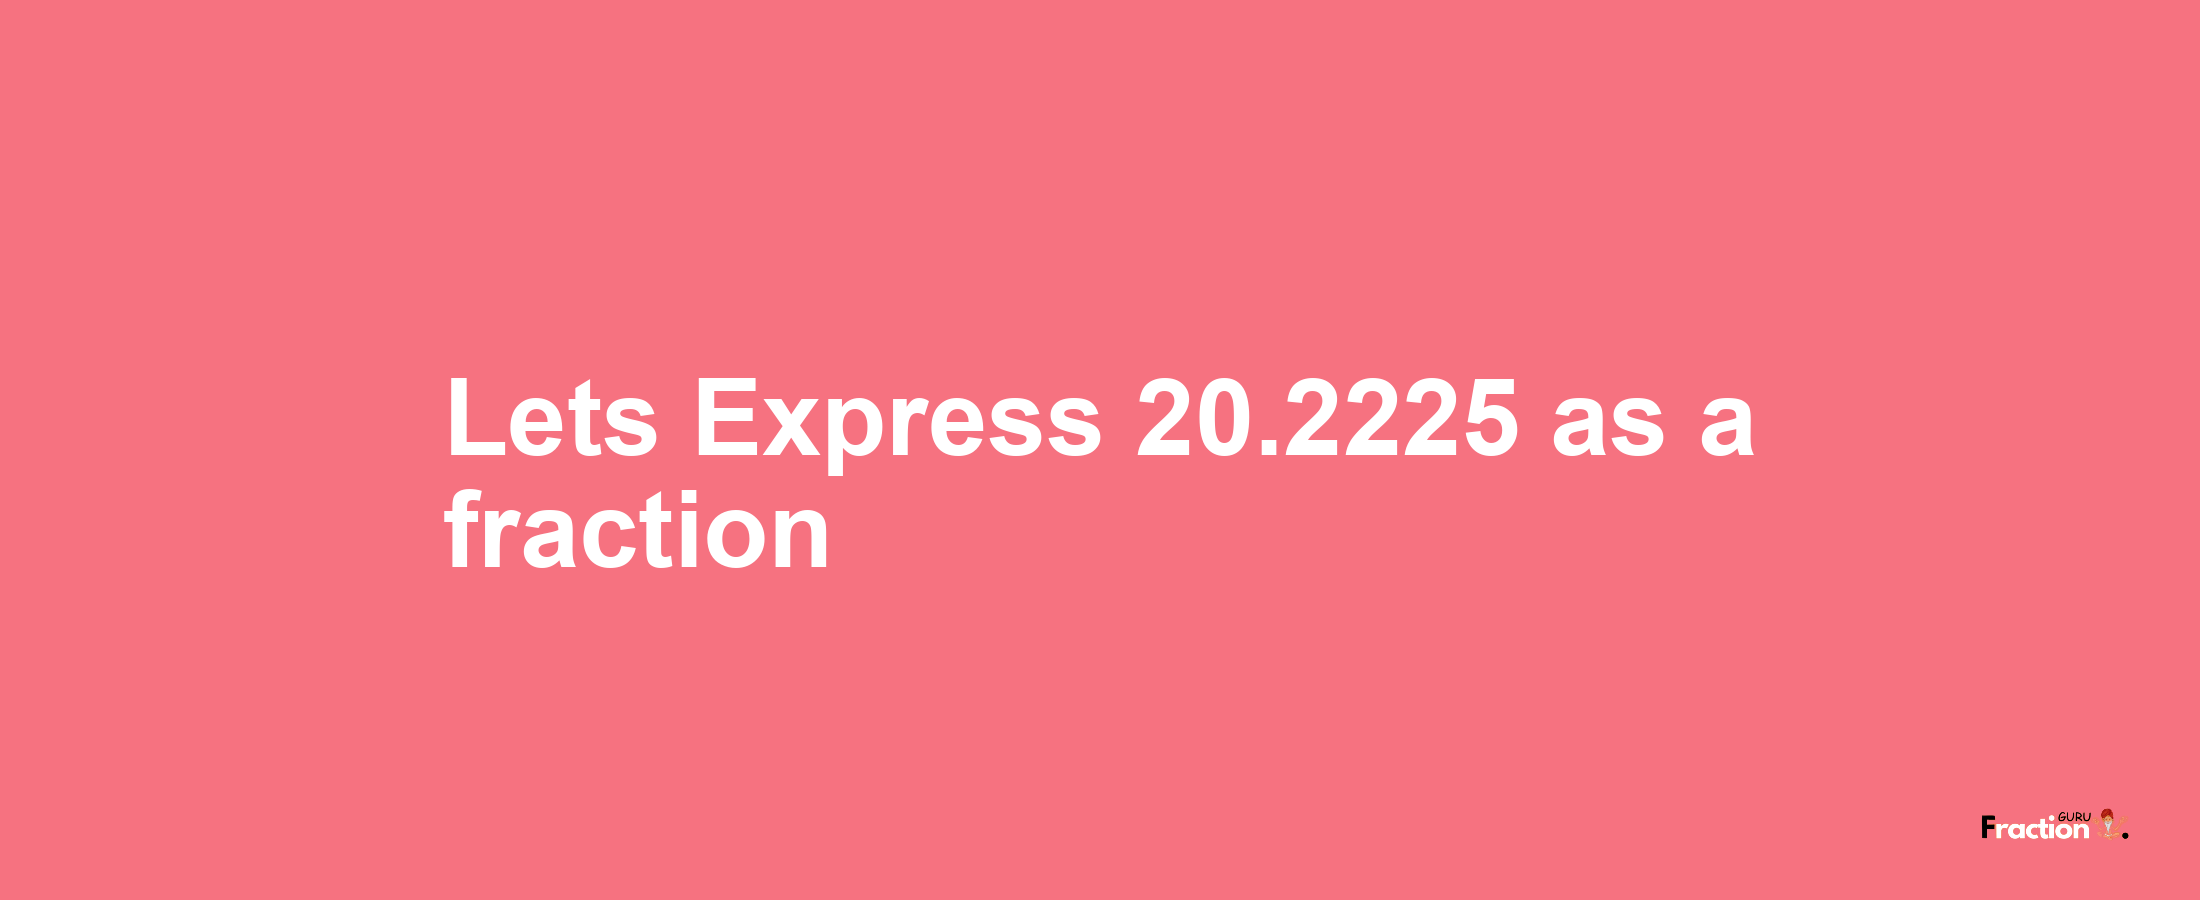 Lets Express 20.2225 as afraction